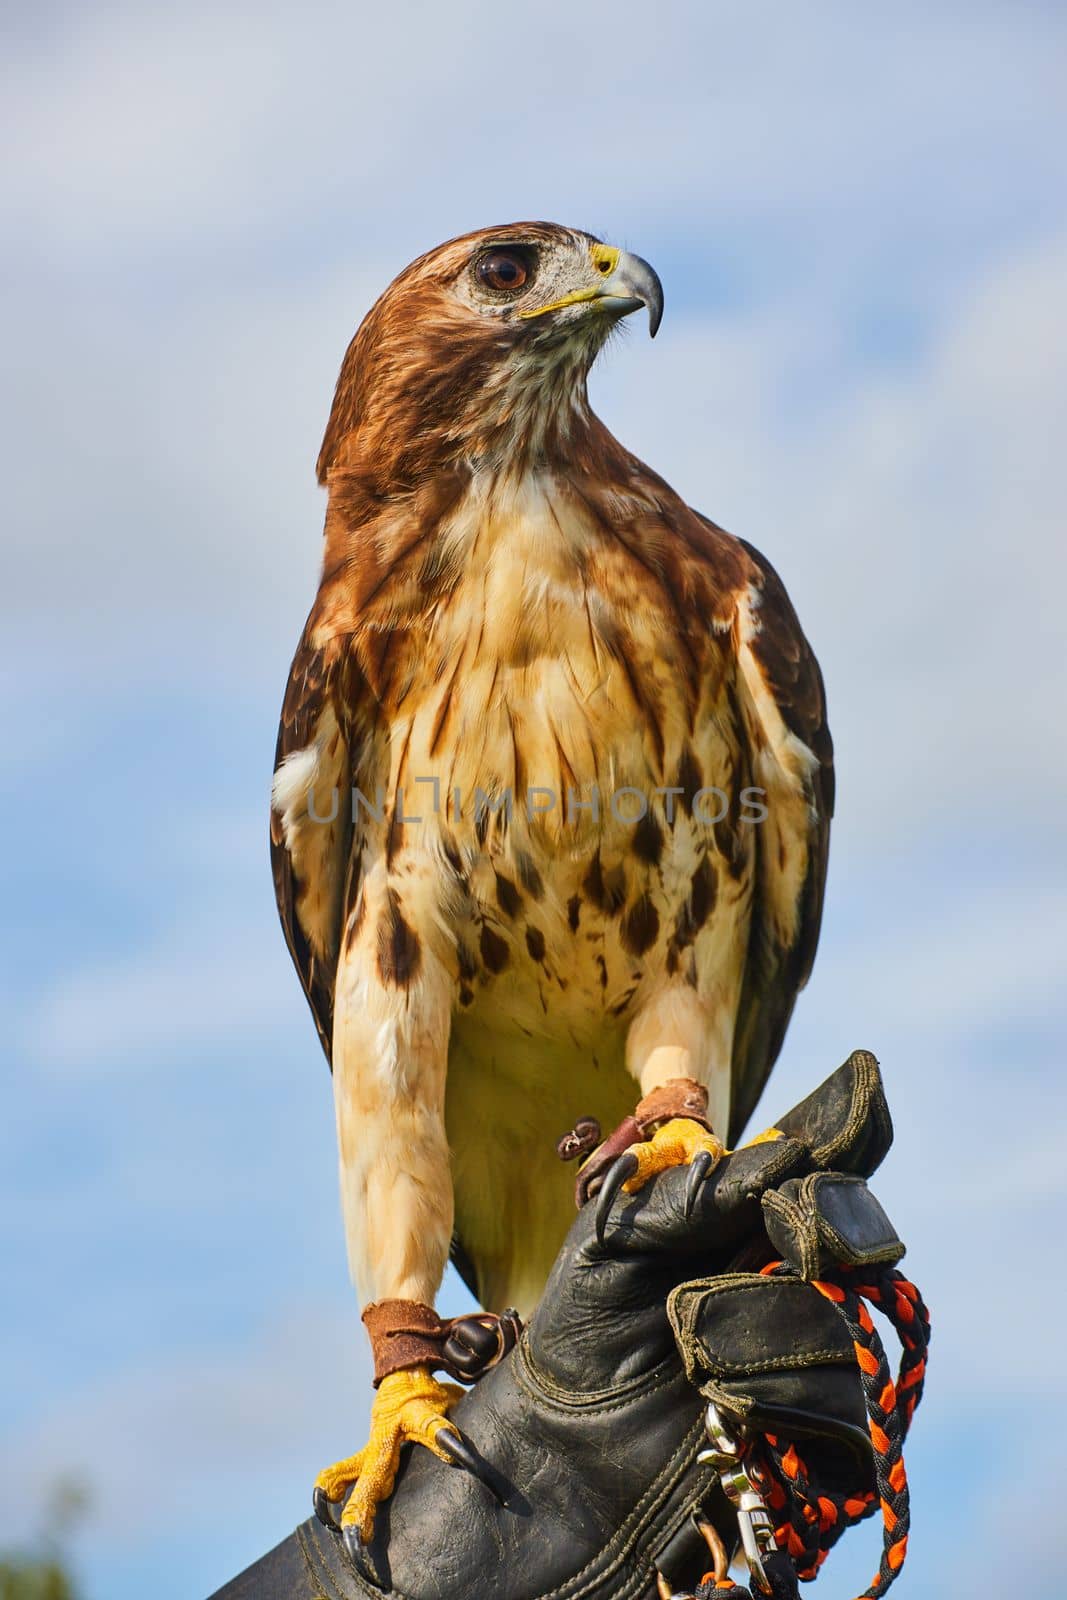 Magnificent Broad-winged Hawk resting on leather glove of trainer by njproductions